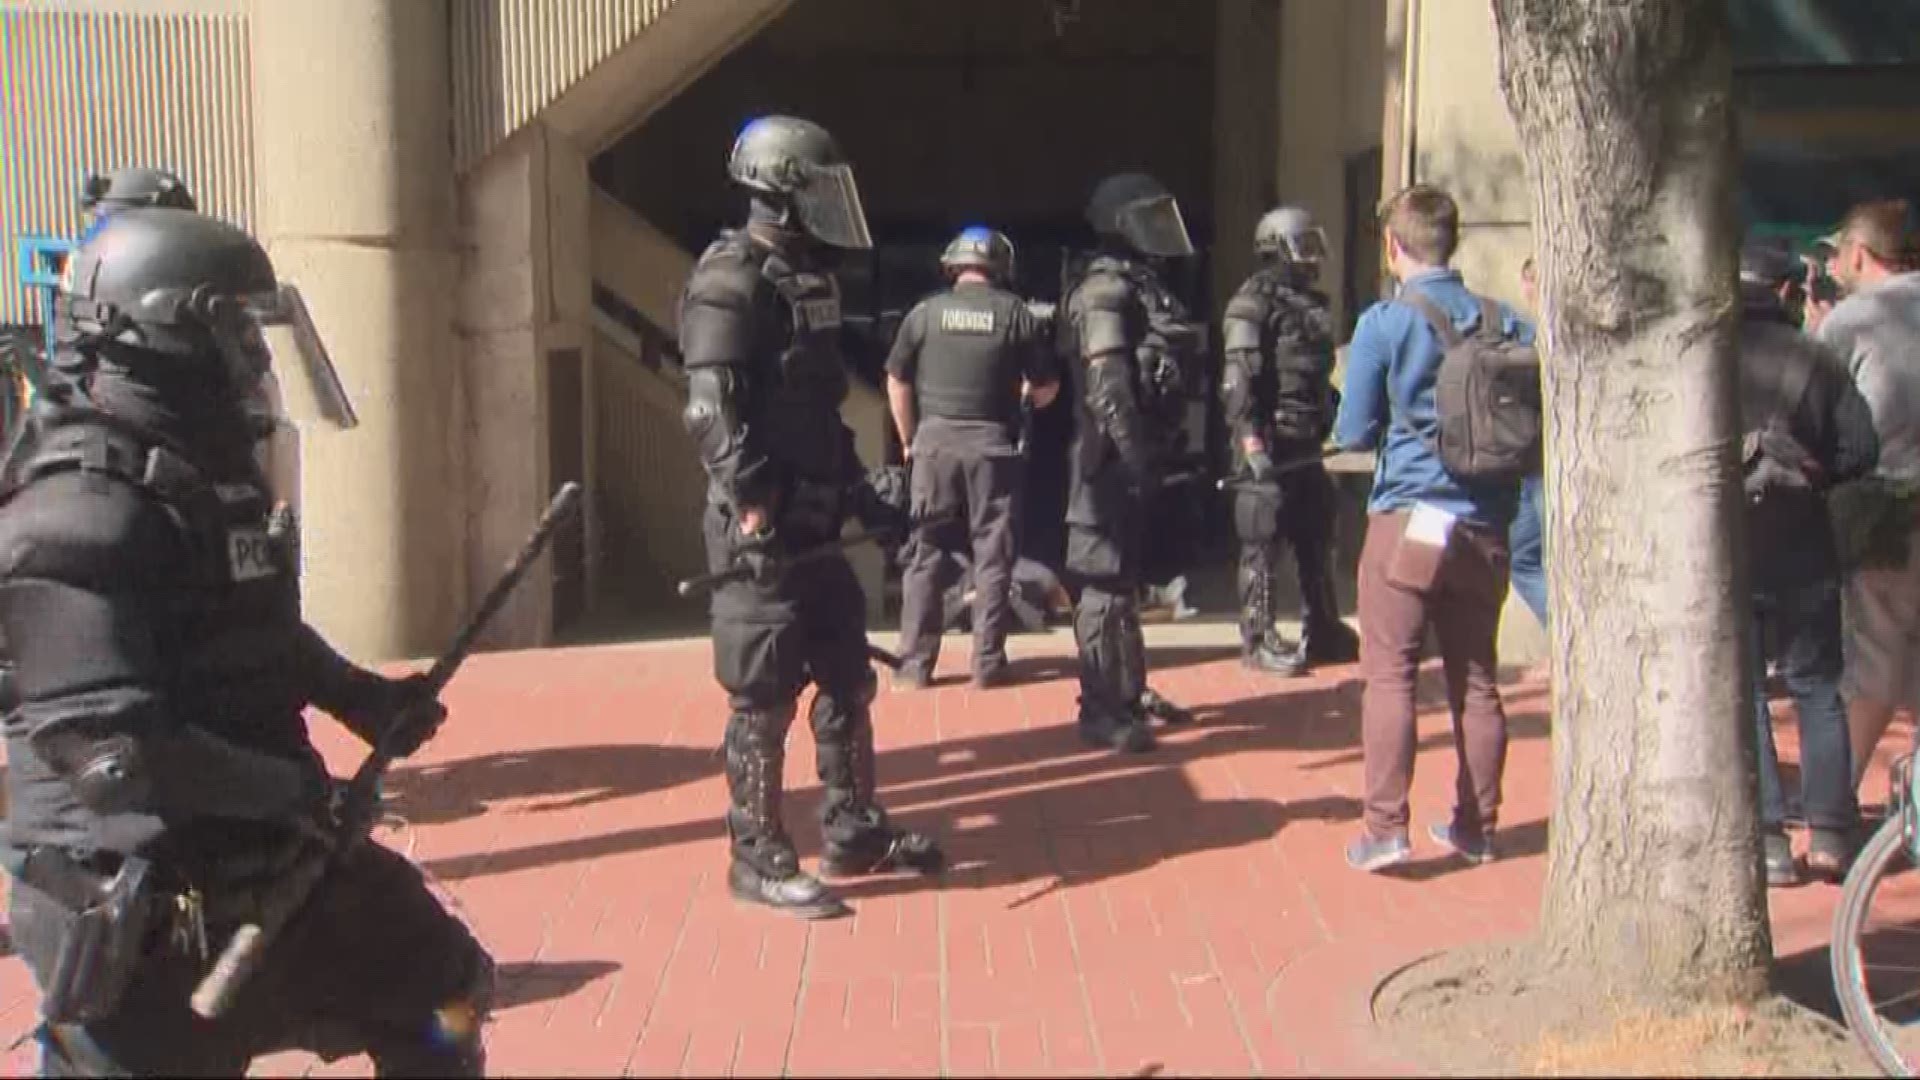 14 people arrested during downtown Portland protests